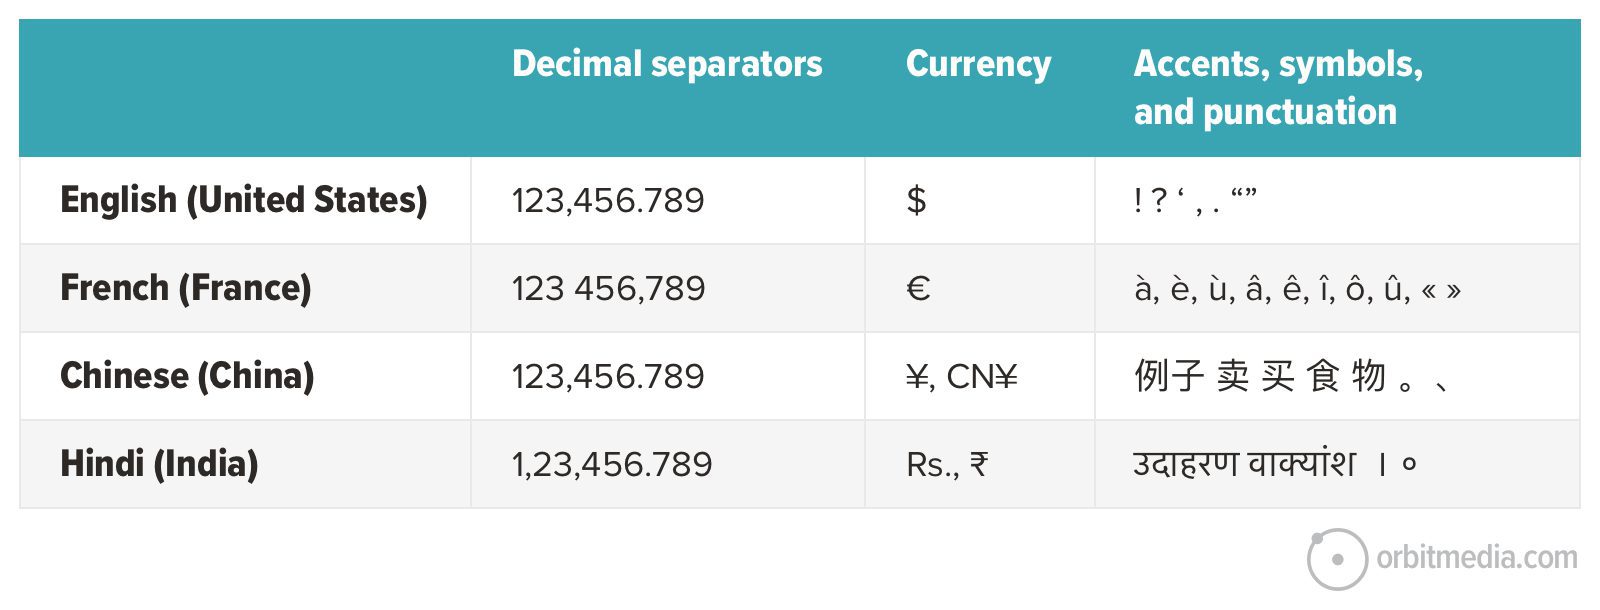 Table comparing decimal separators, currency symbols, and punctuation across four languages: english (us), french (france), chinese (china), and hindi (india).